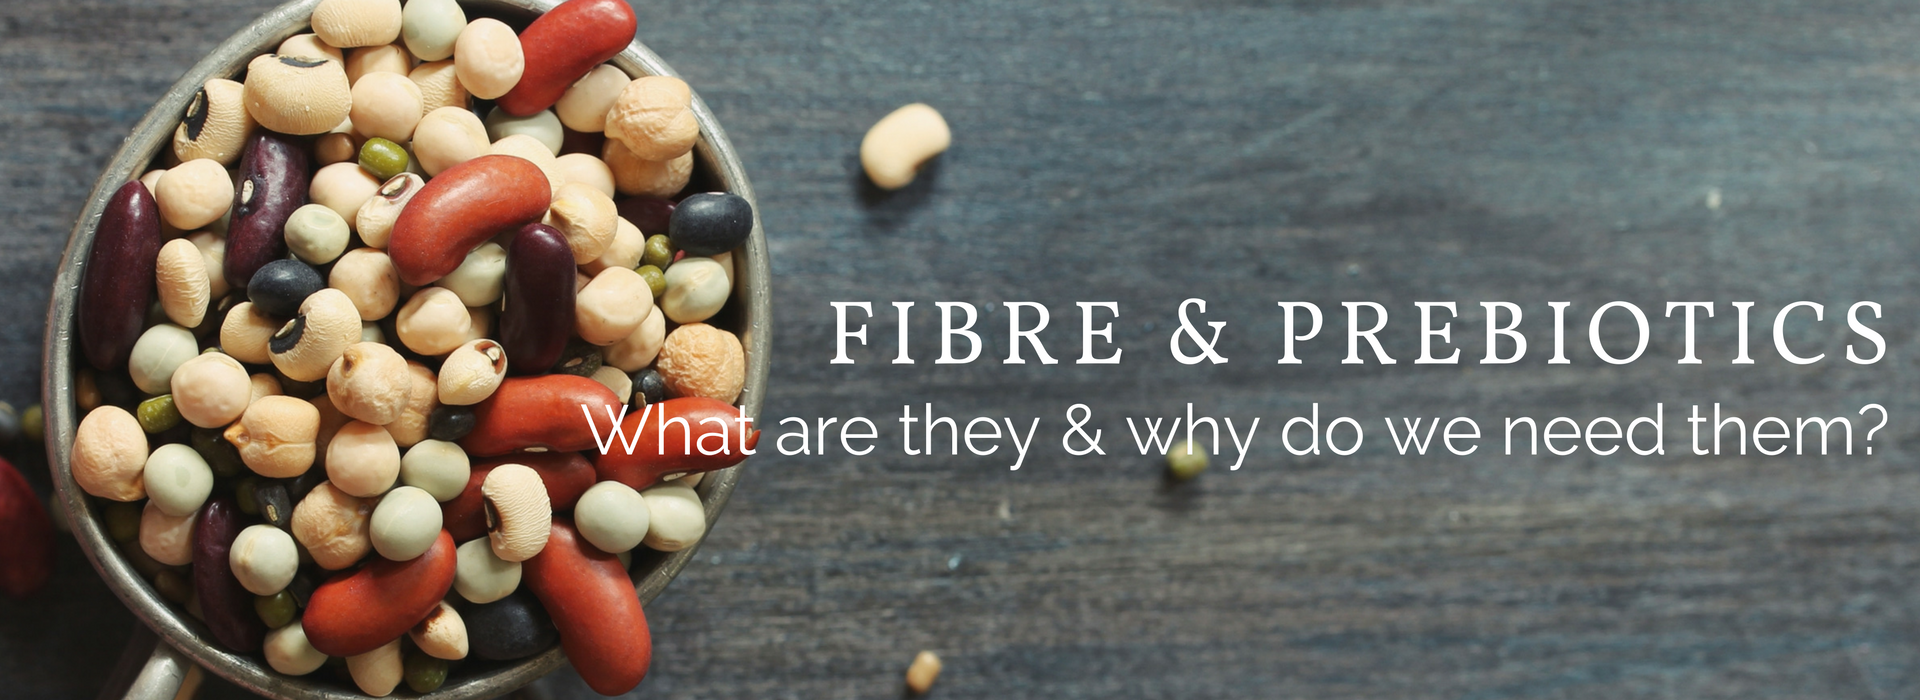 Fibre and prebiotics; what are they and why do we need them?